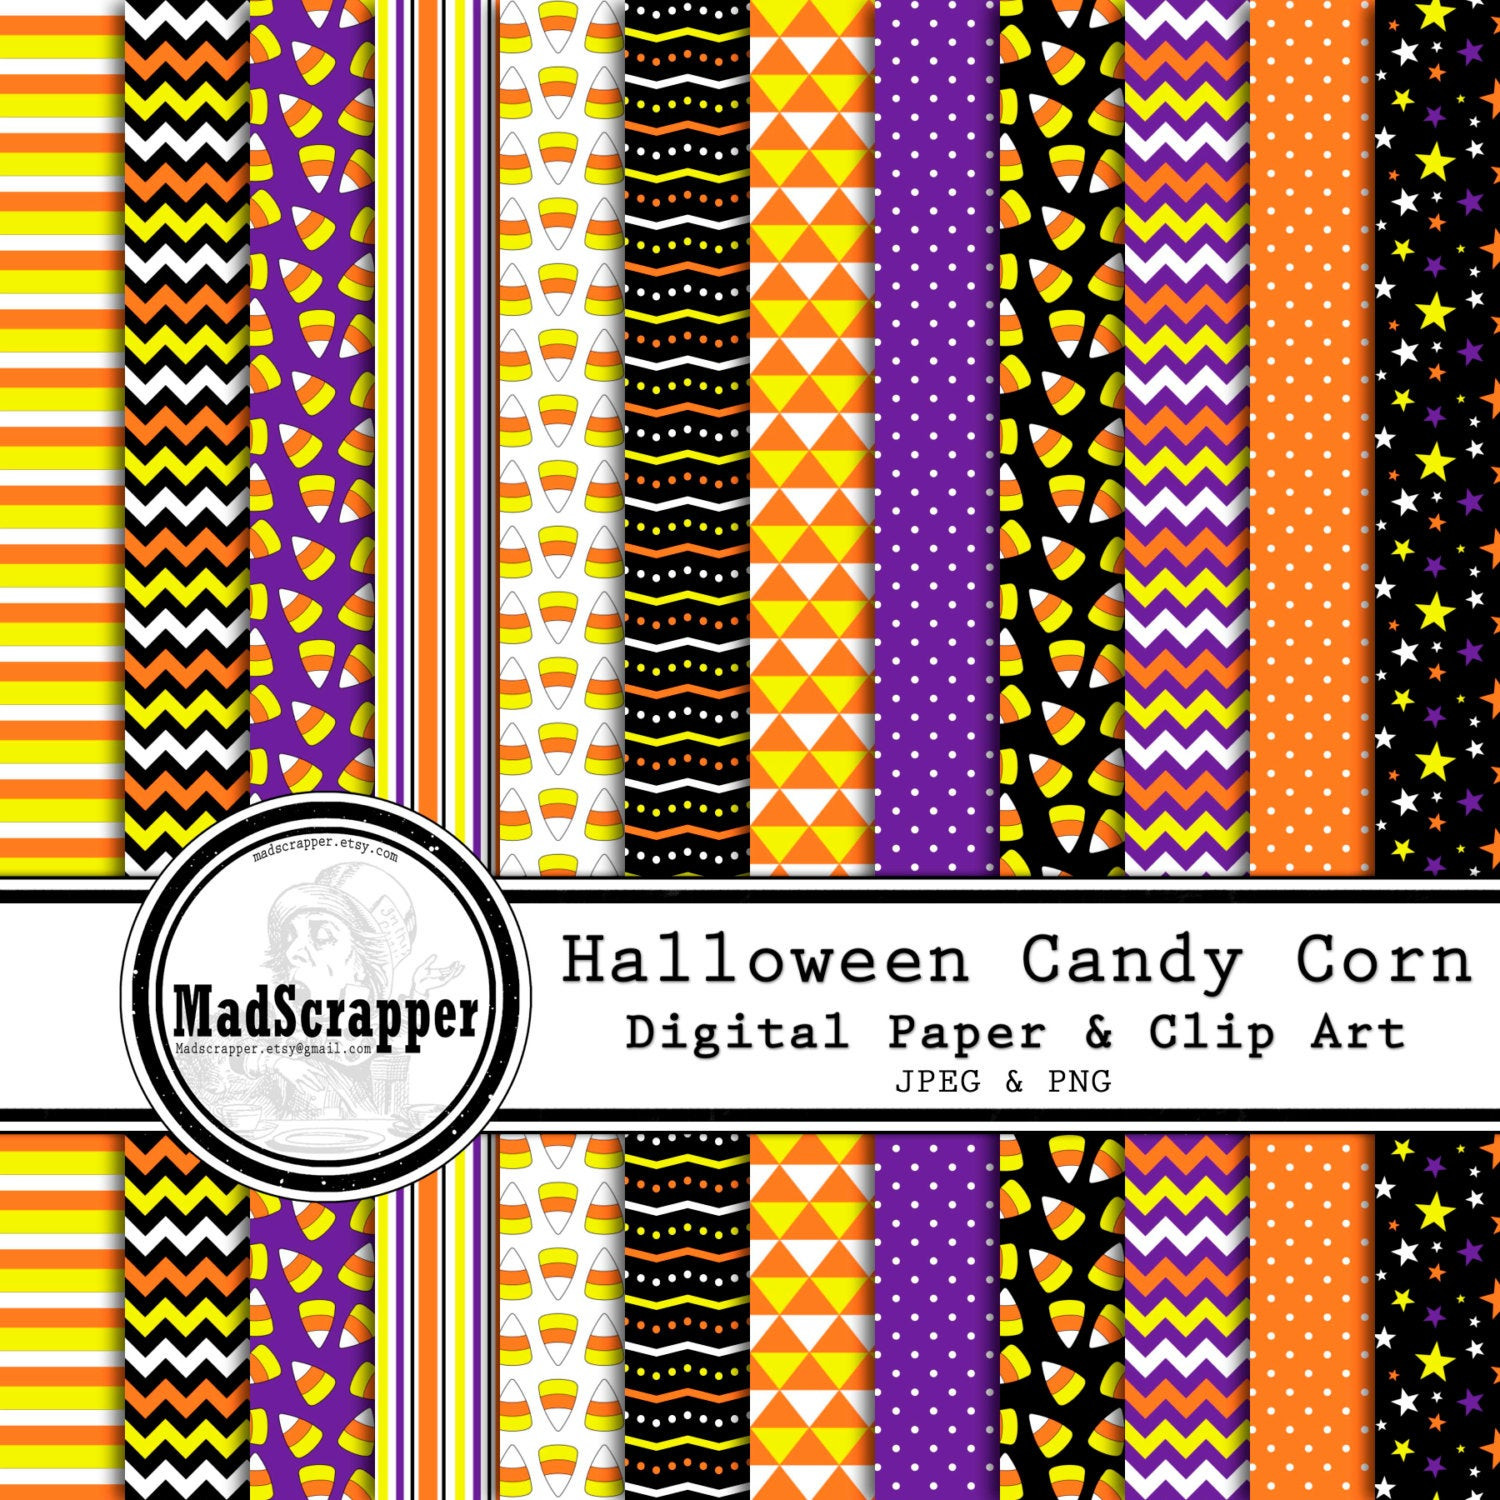 Candy Corn Colors
 Digital Scrapbook Paper Candy Corn Colors Halloween Paper and